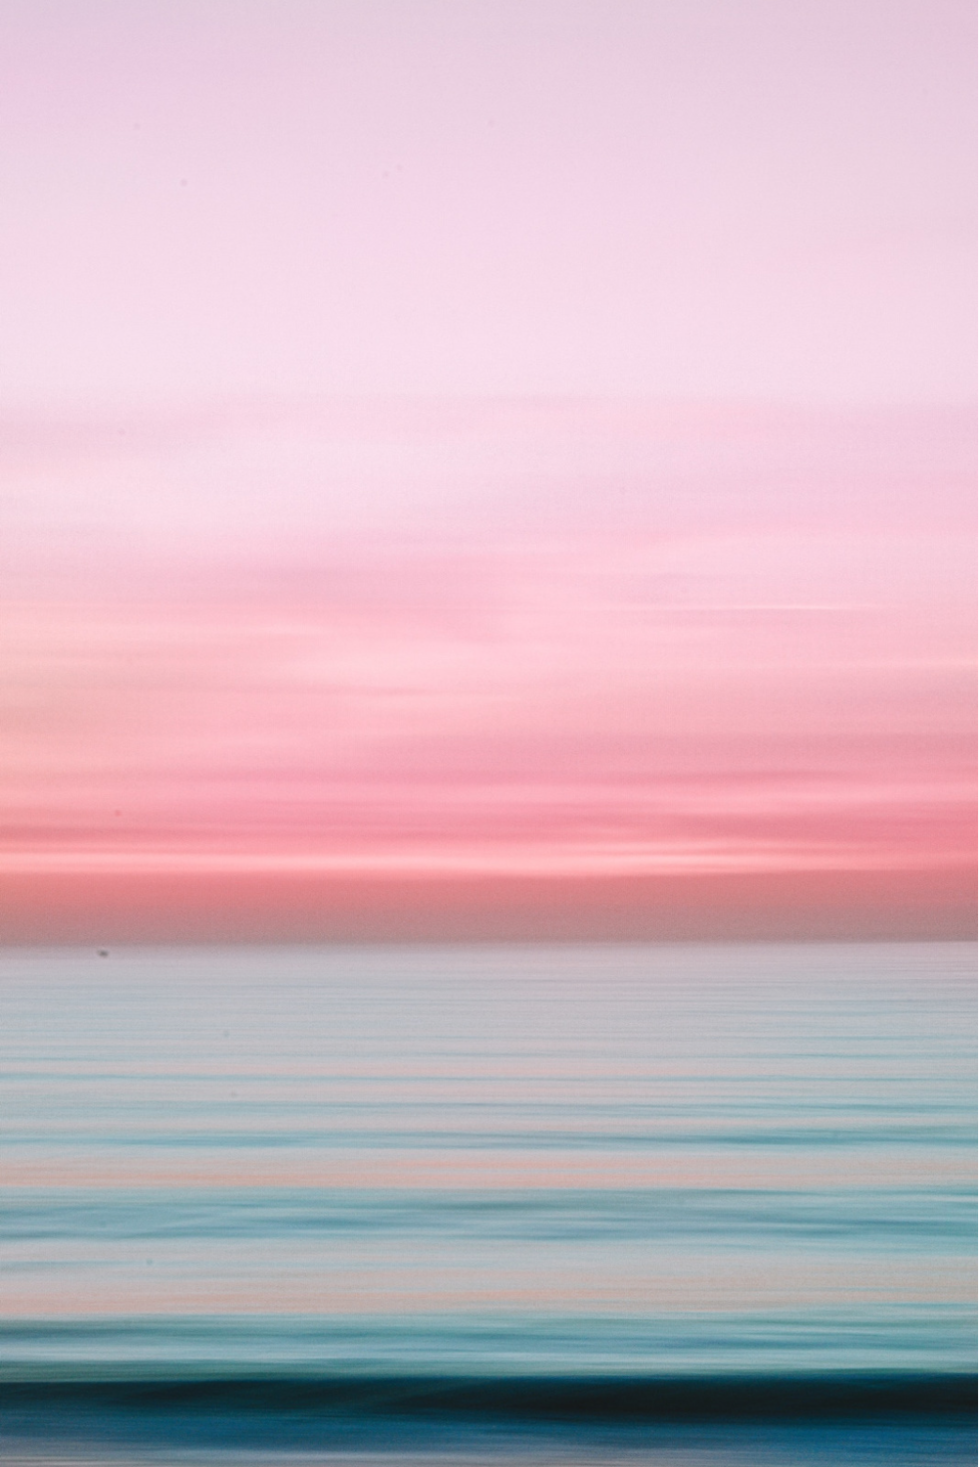 40 Cute Pink Wallpapers For iPhone| Free Download. - HONESTLYBECCA